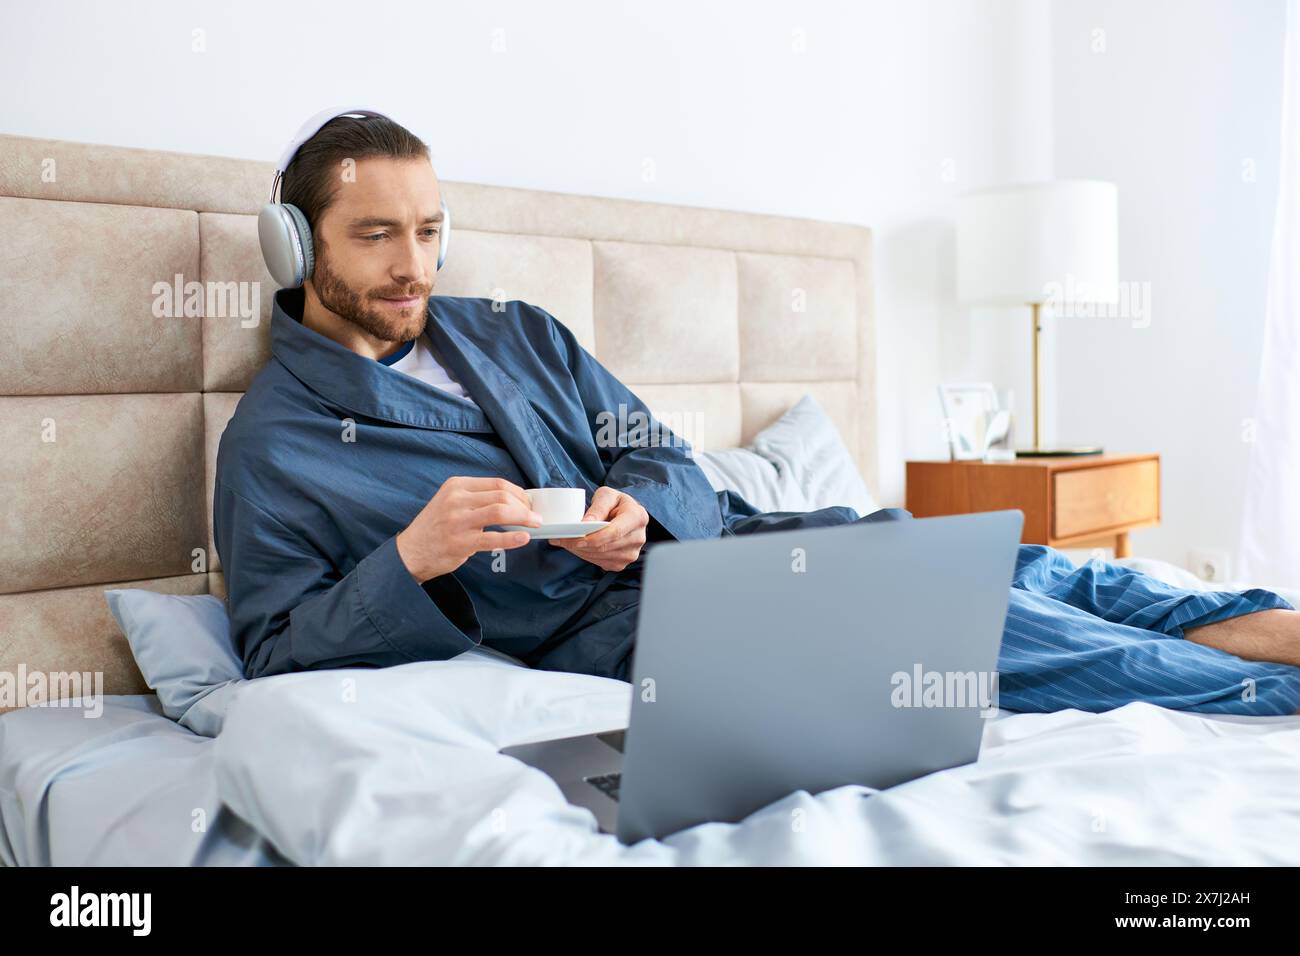 A man in relaxation pose on bed, using a laptop. Stock Photo